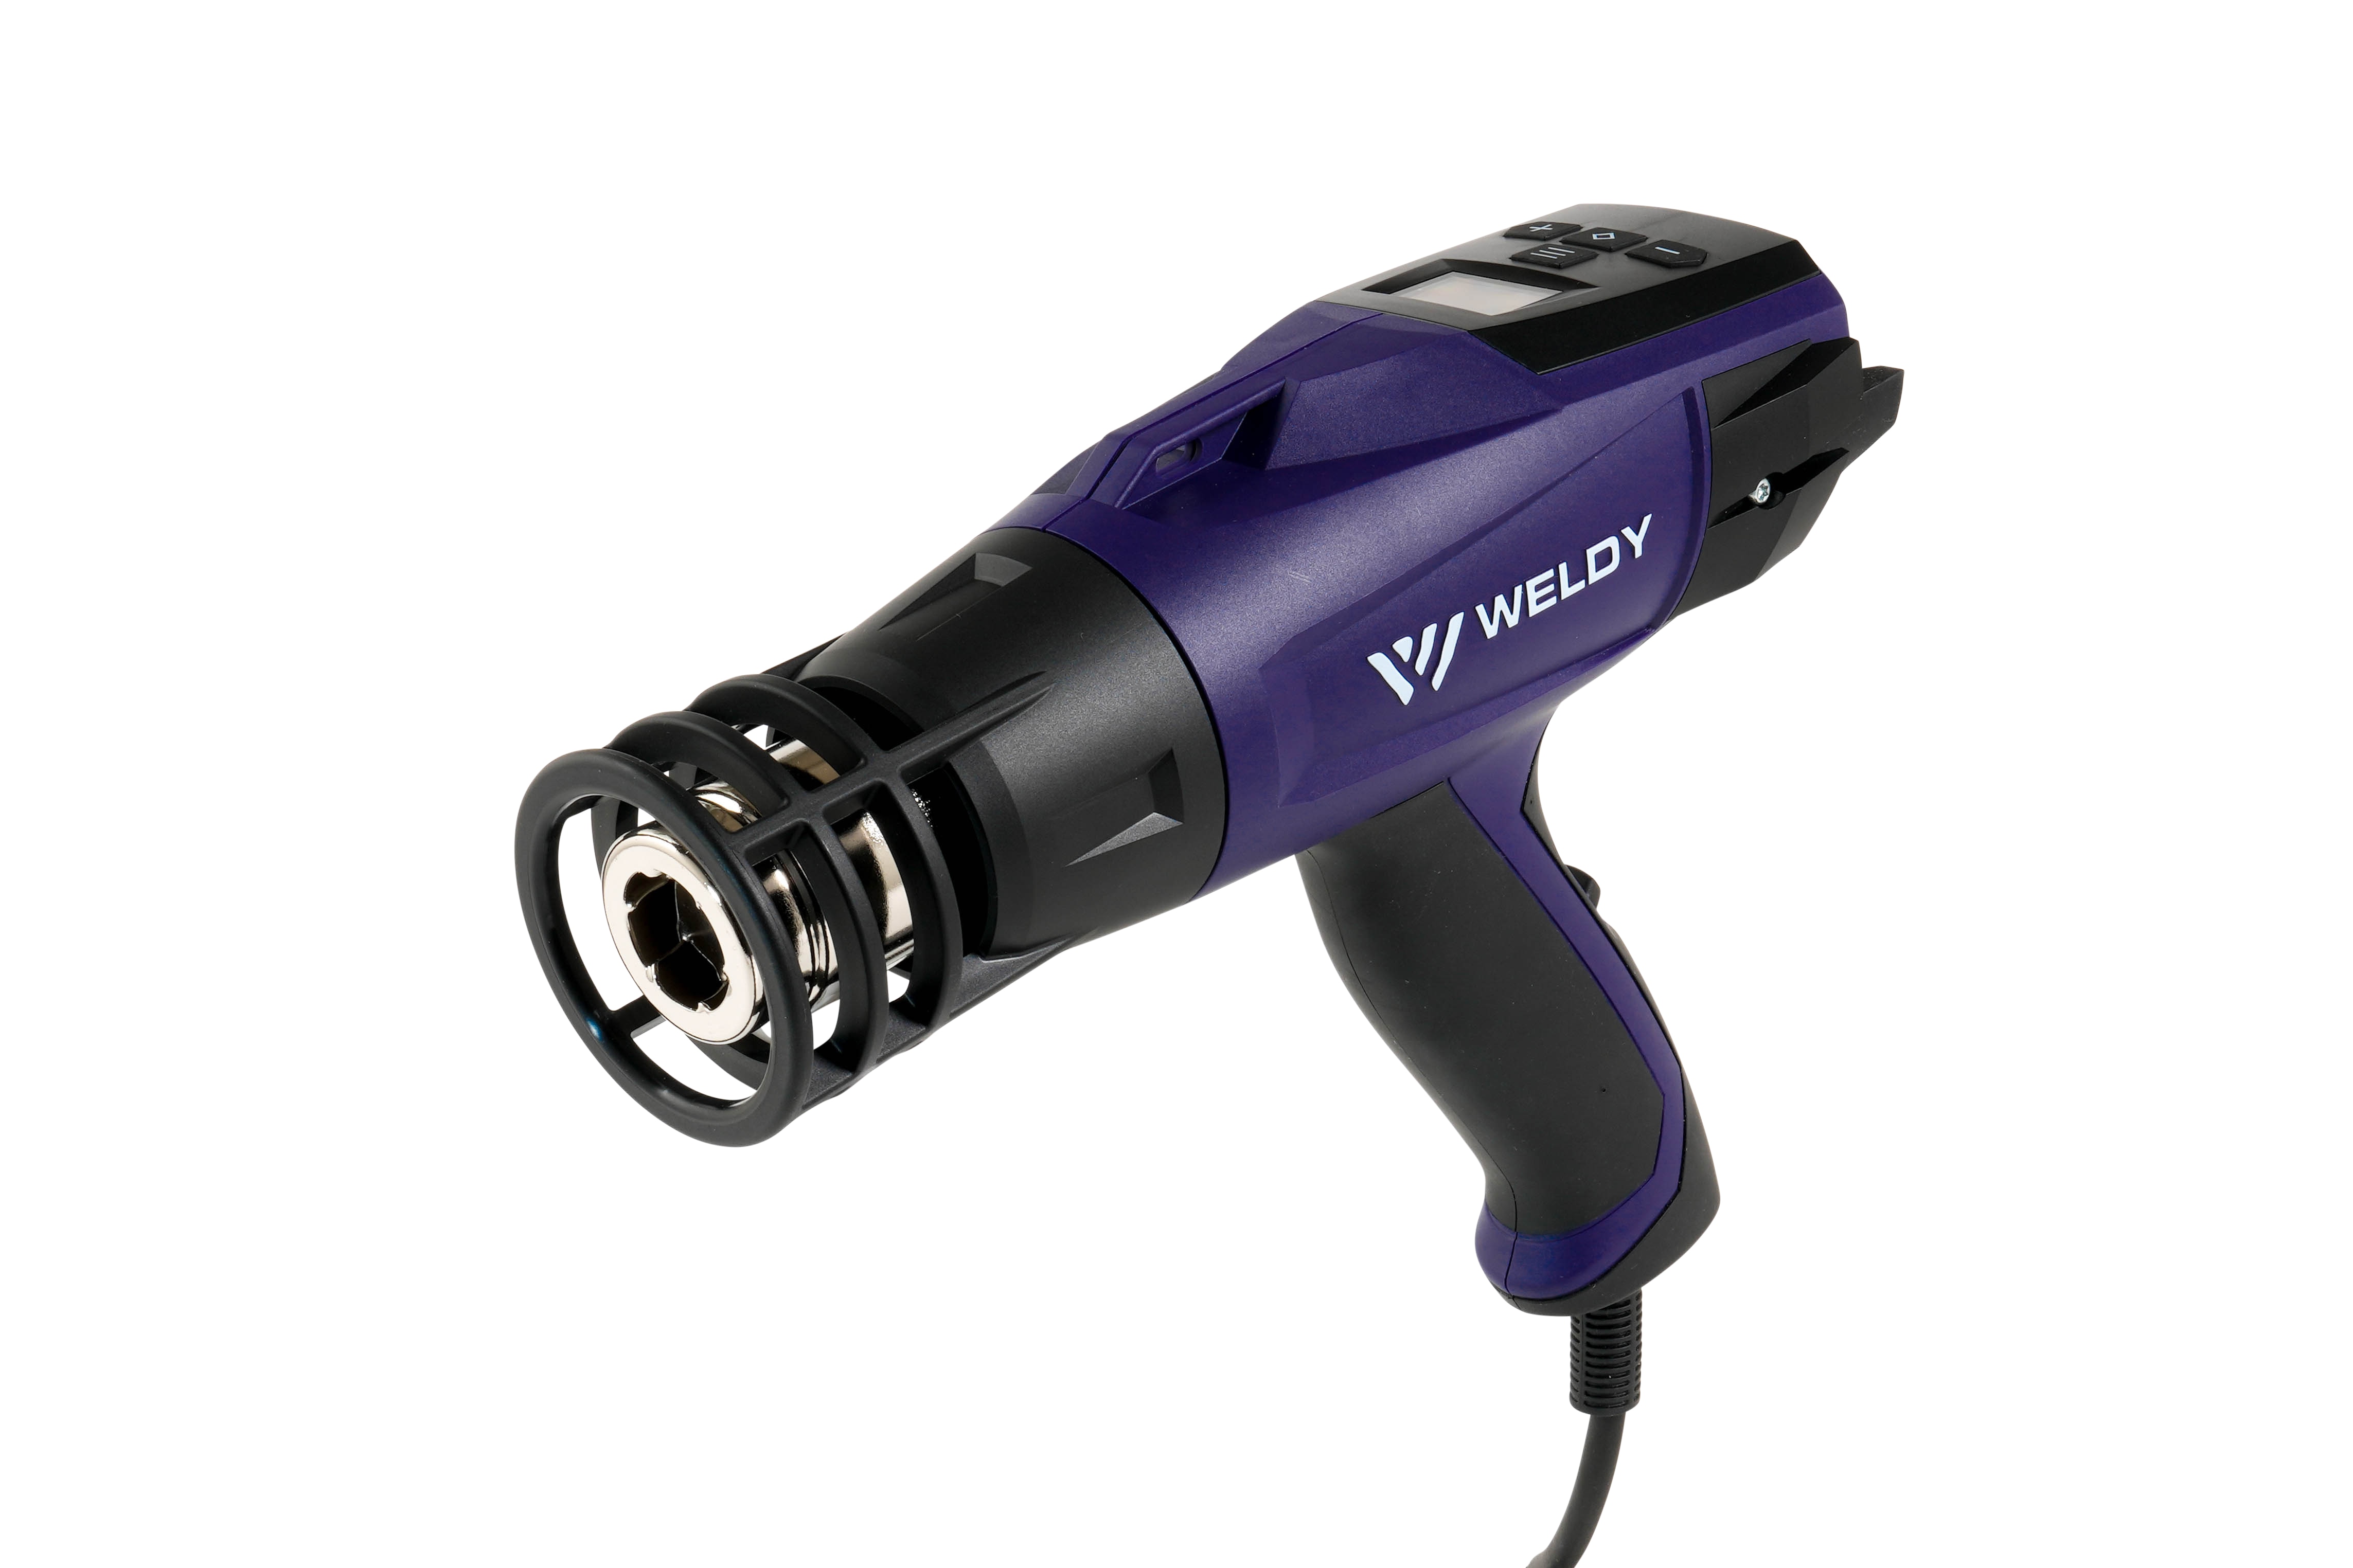 Everyone loves a dea! Don't forget to buy Weldy HG 530-A Heat Gun Car  Wrapping Kit Weldy at the Clearance Sale